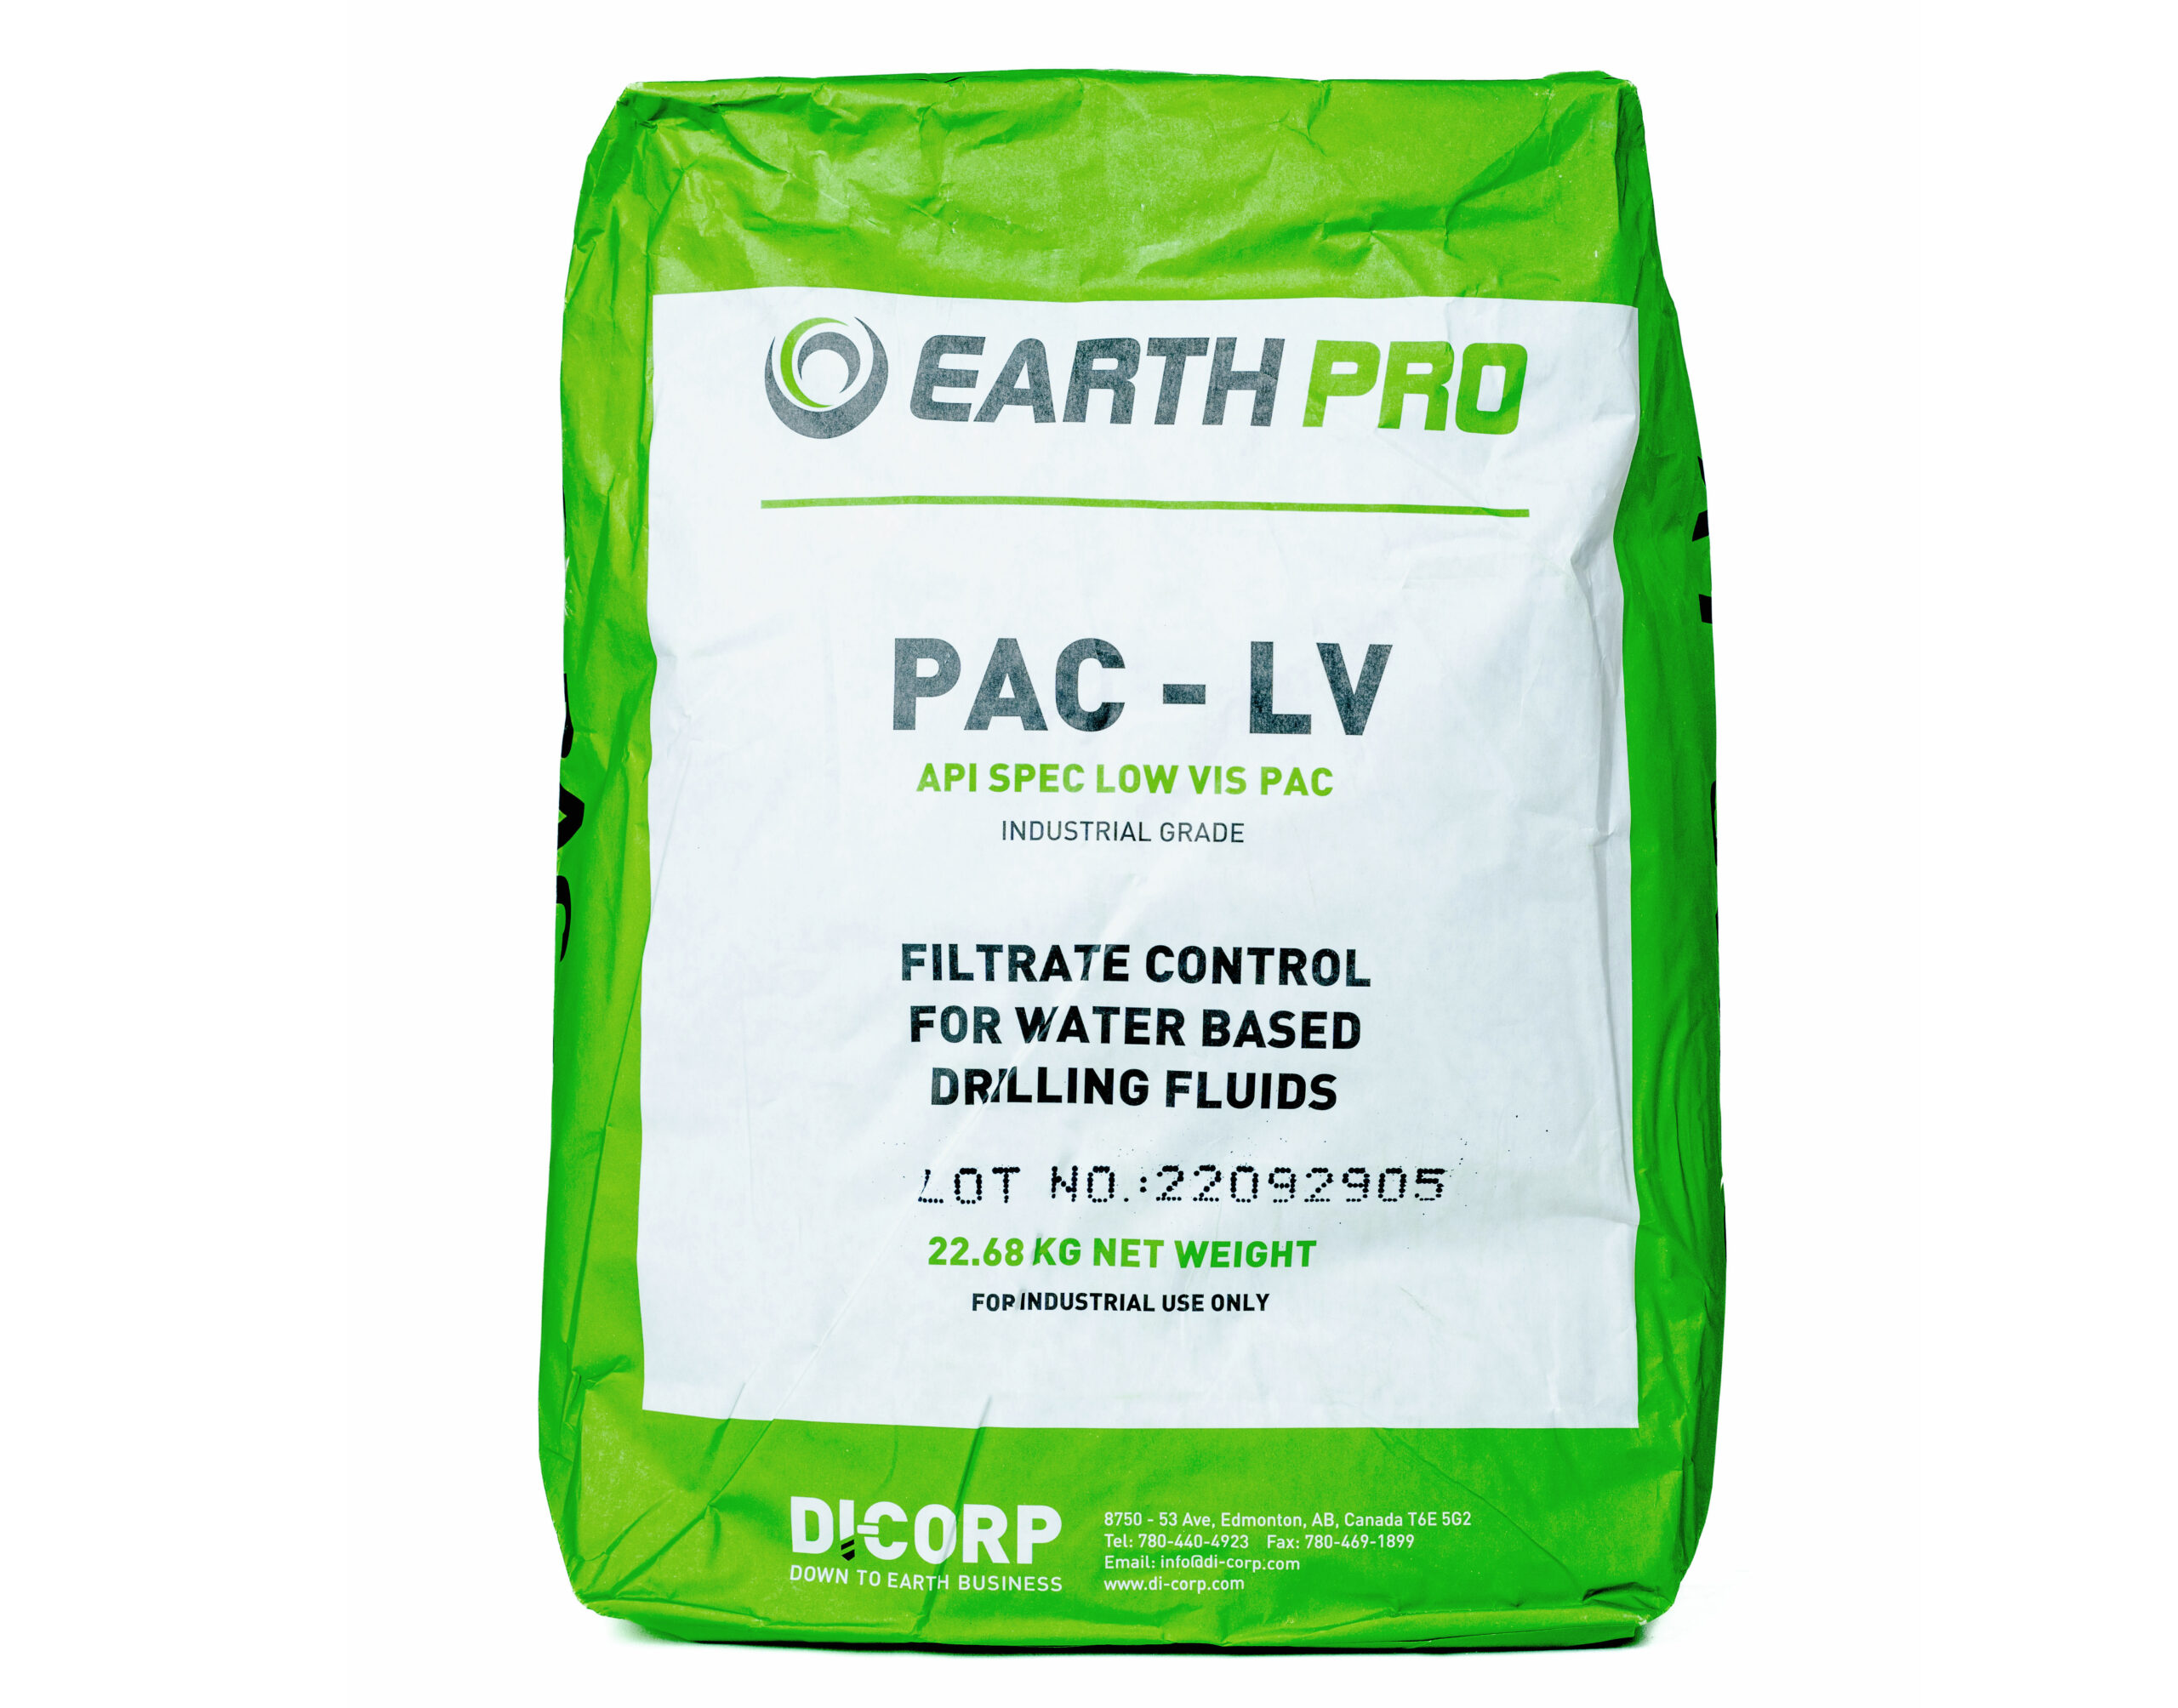 A bag of low-viscosity polyanionic cellulose polymer. The bag is green and includes the text: “PAC-LV API Spec low vis PAC. Filtrate control for water-based drilling fluids. 22.68KG net weight. For industrial use only.”